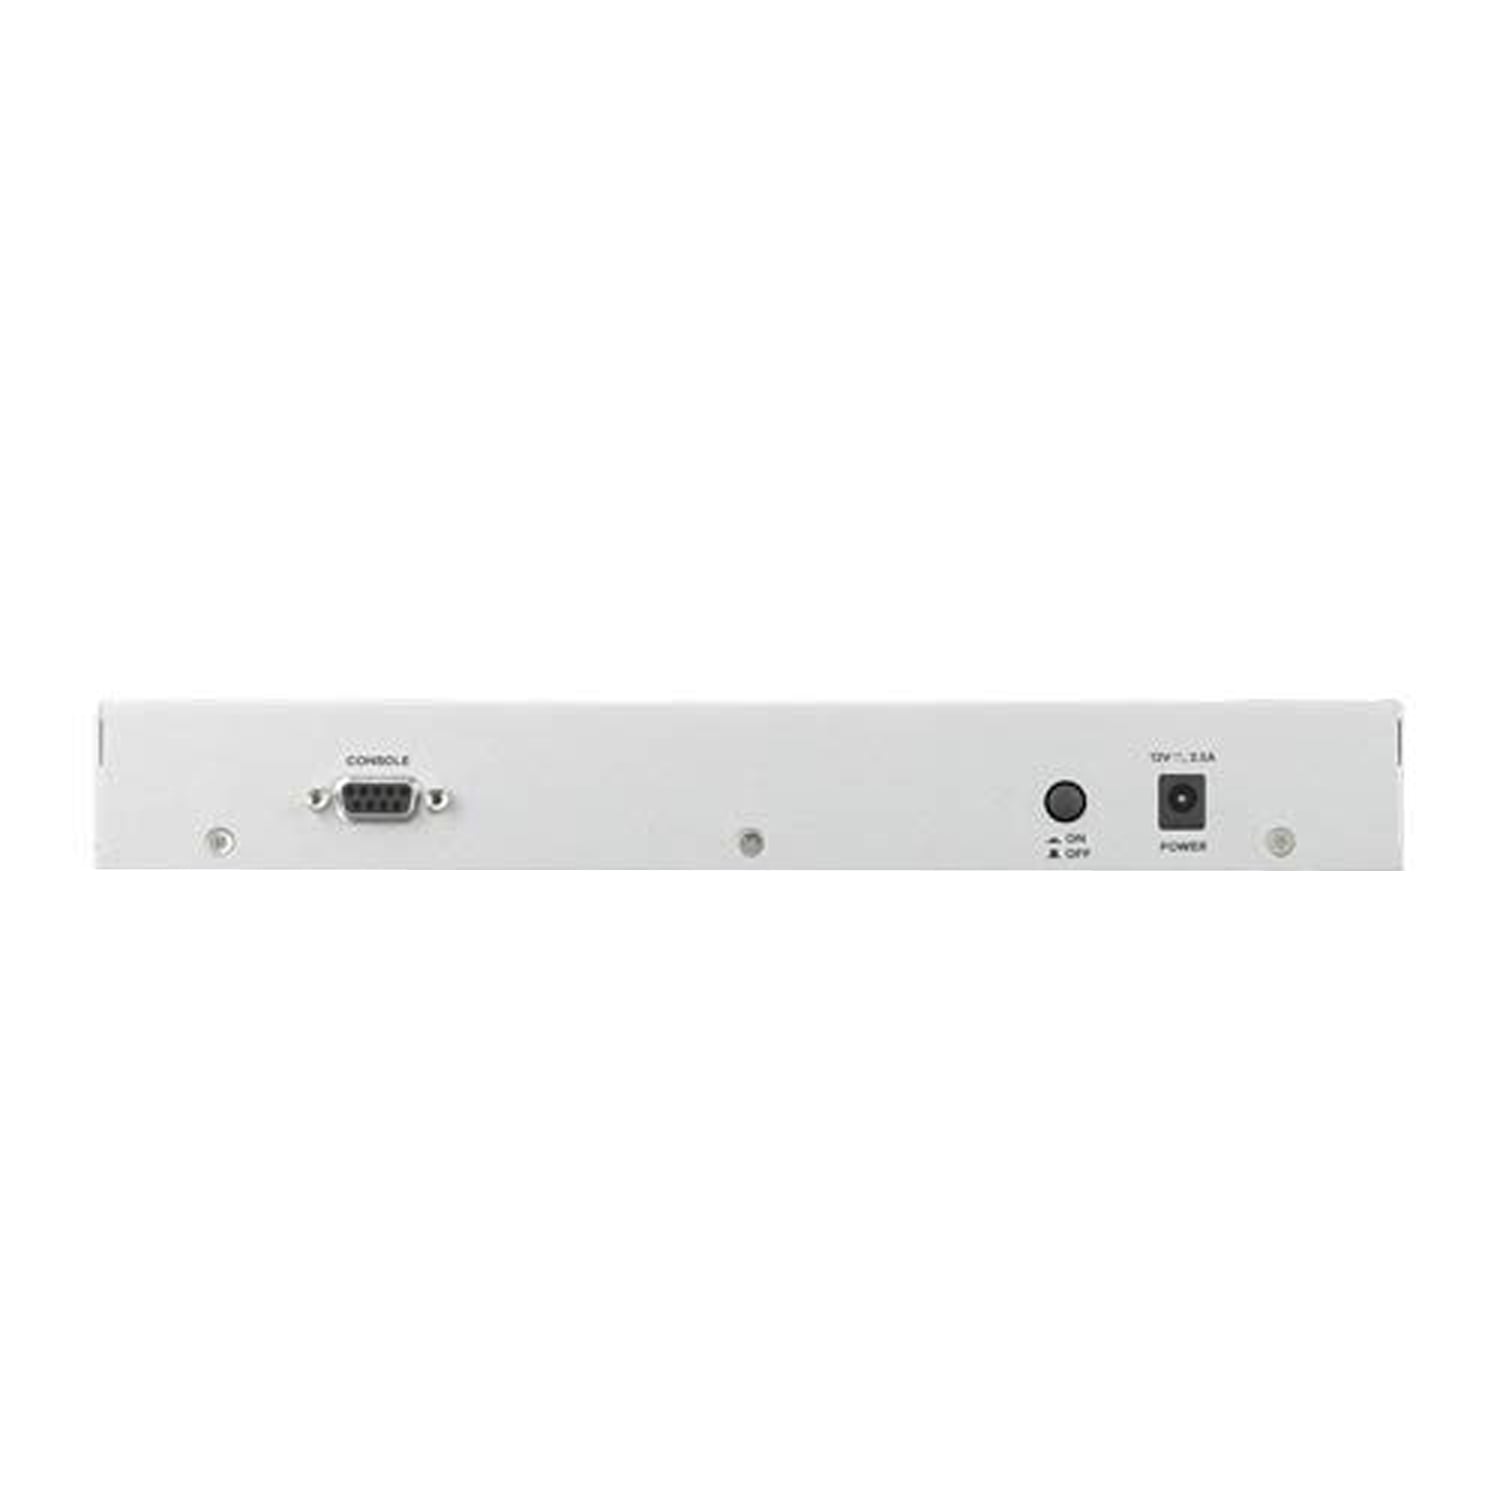 Zyxel Advanced Threat Protection Security UTM Firewall for Small